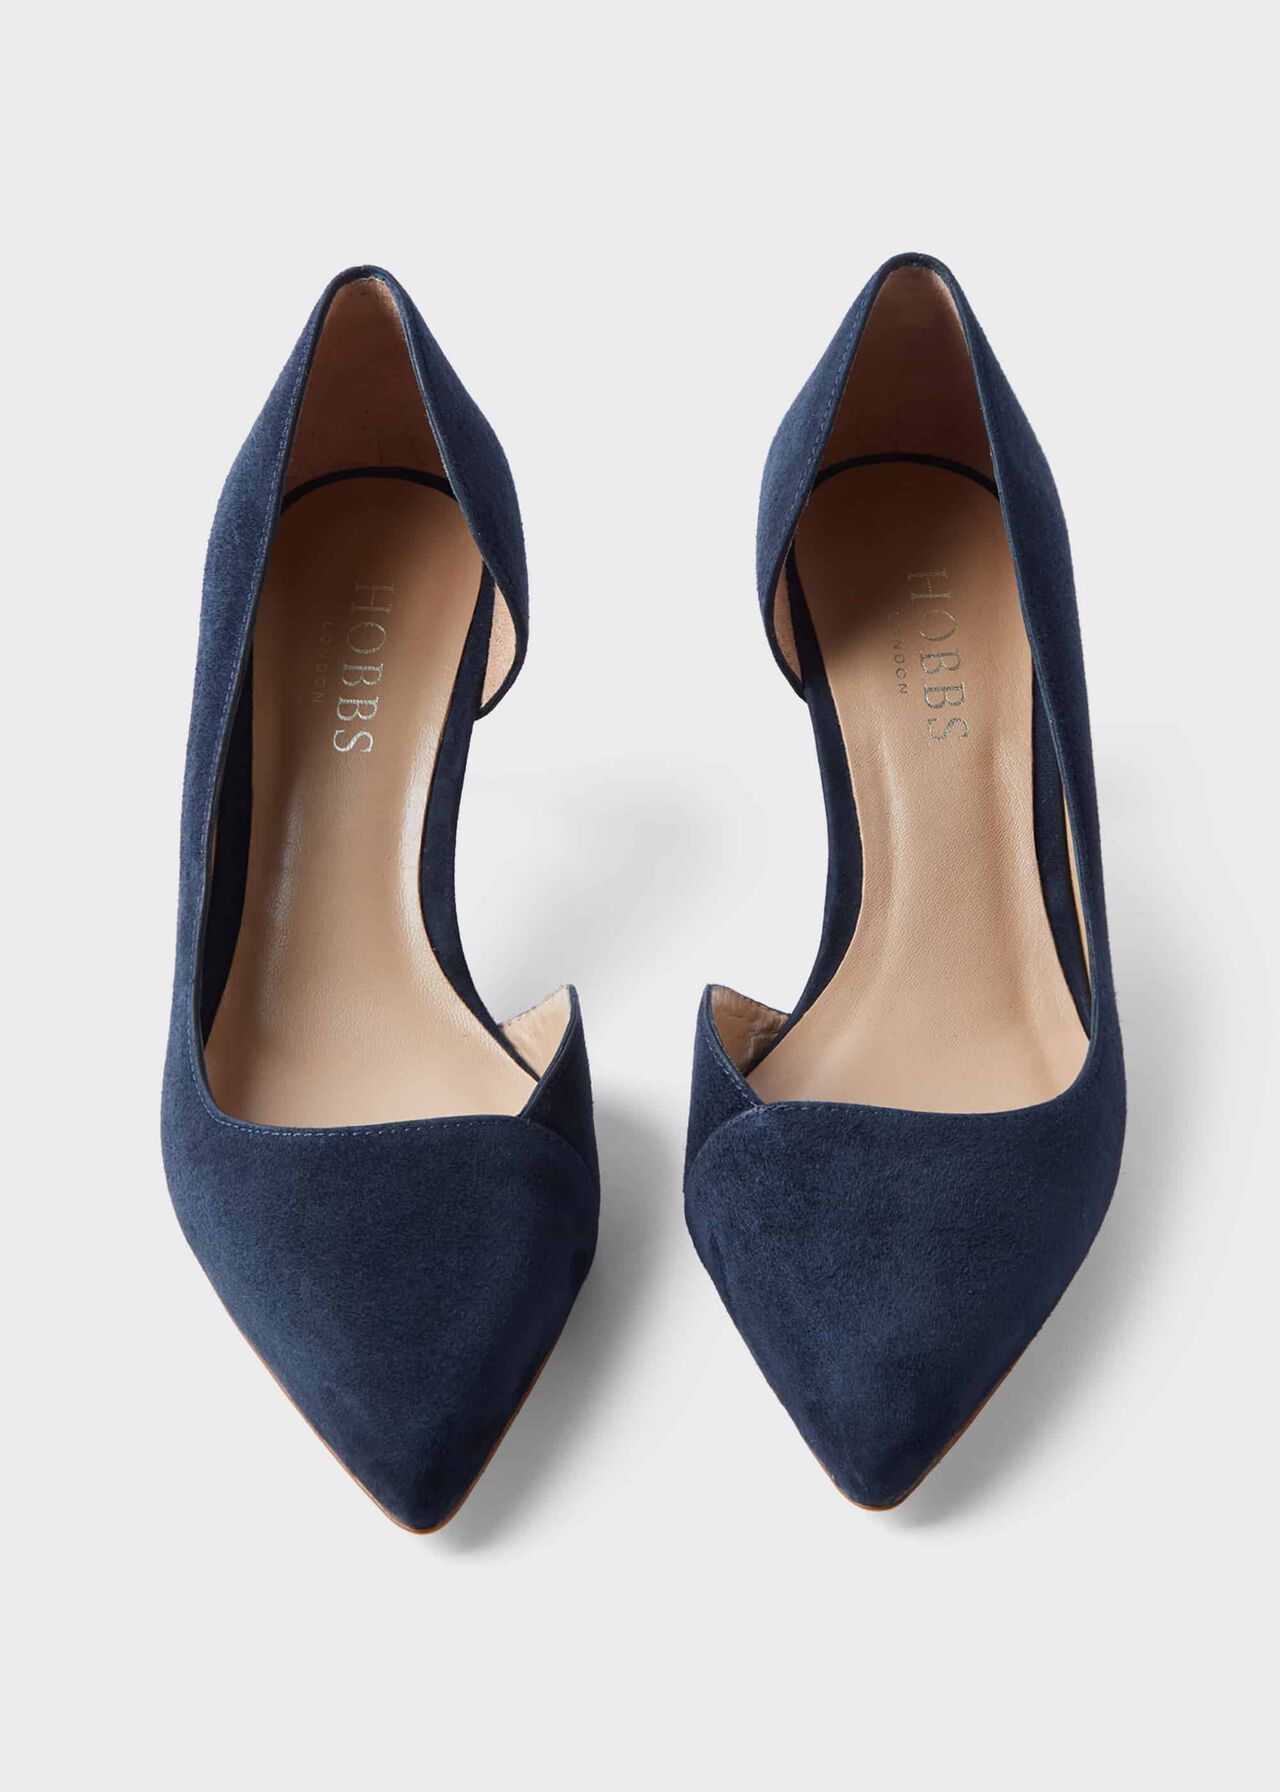 Selena Suede D'Orsay Court Shoes, Navy, hi-res